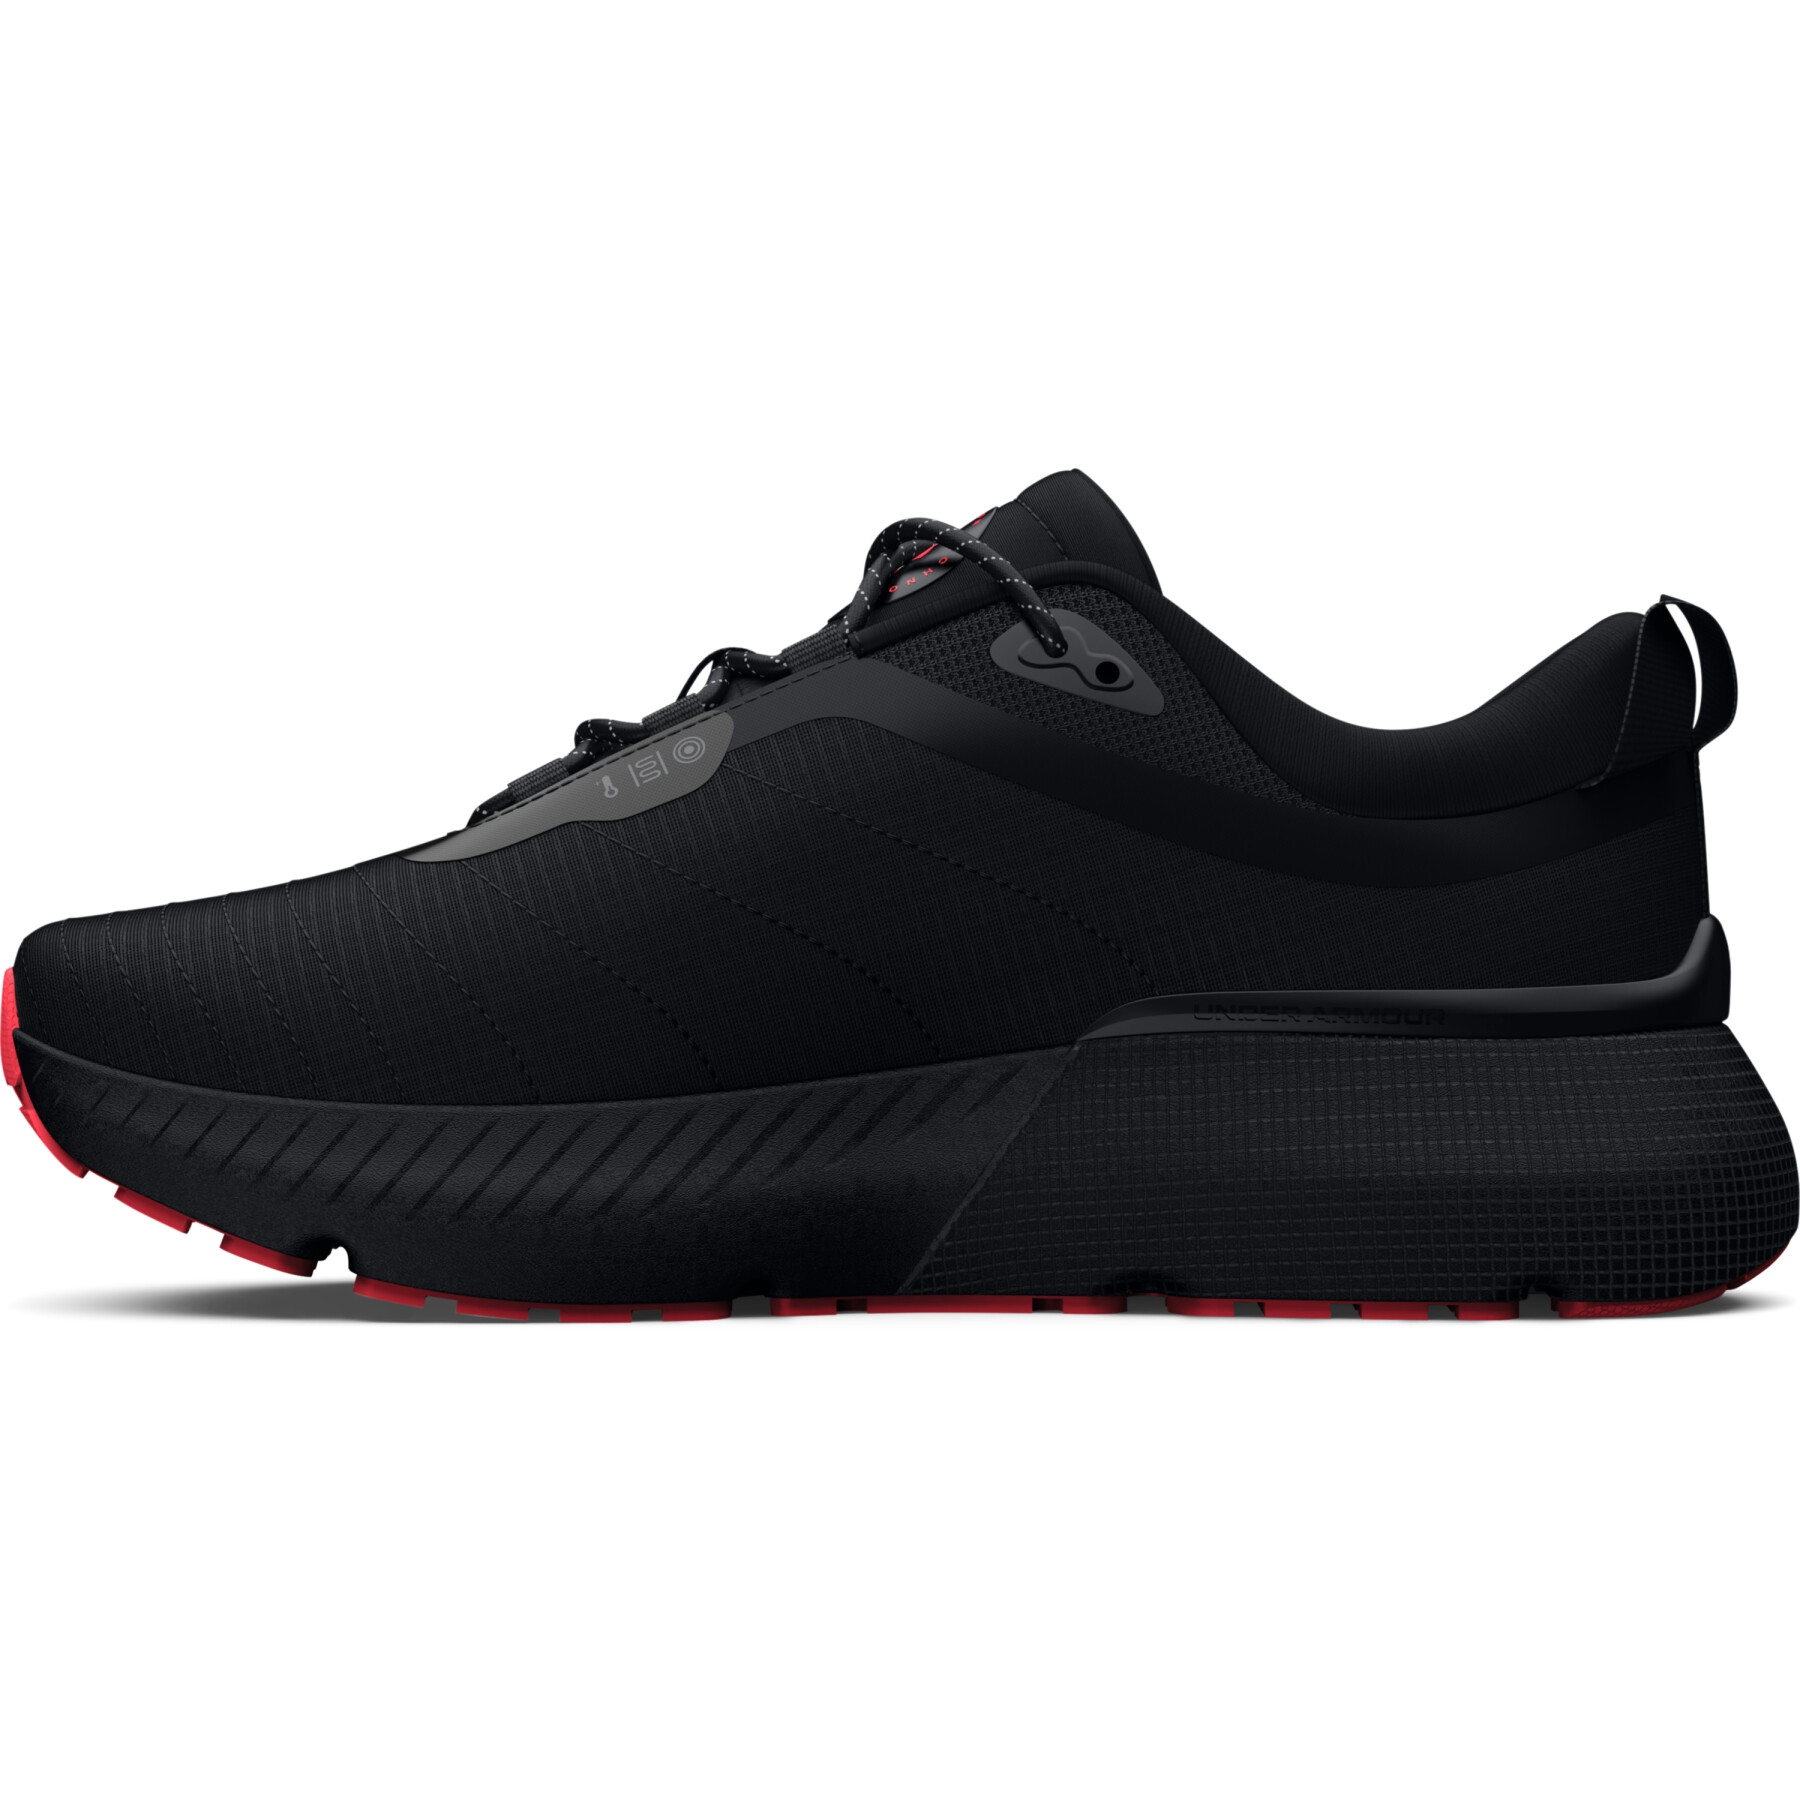 Women's running shoes Under Armour Hovr Mega Warm